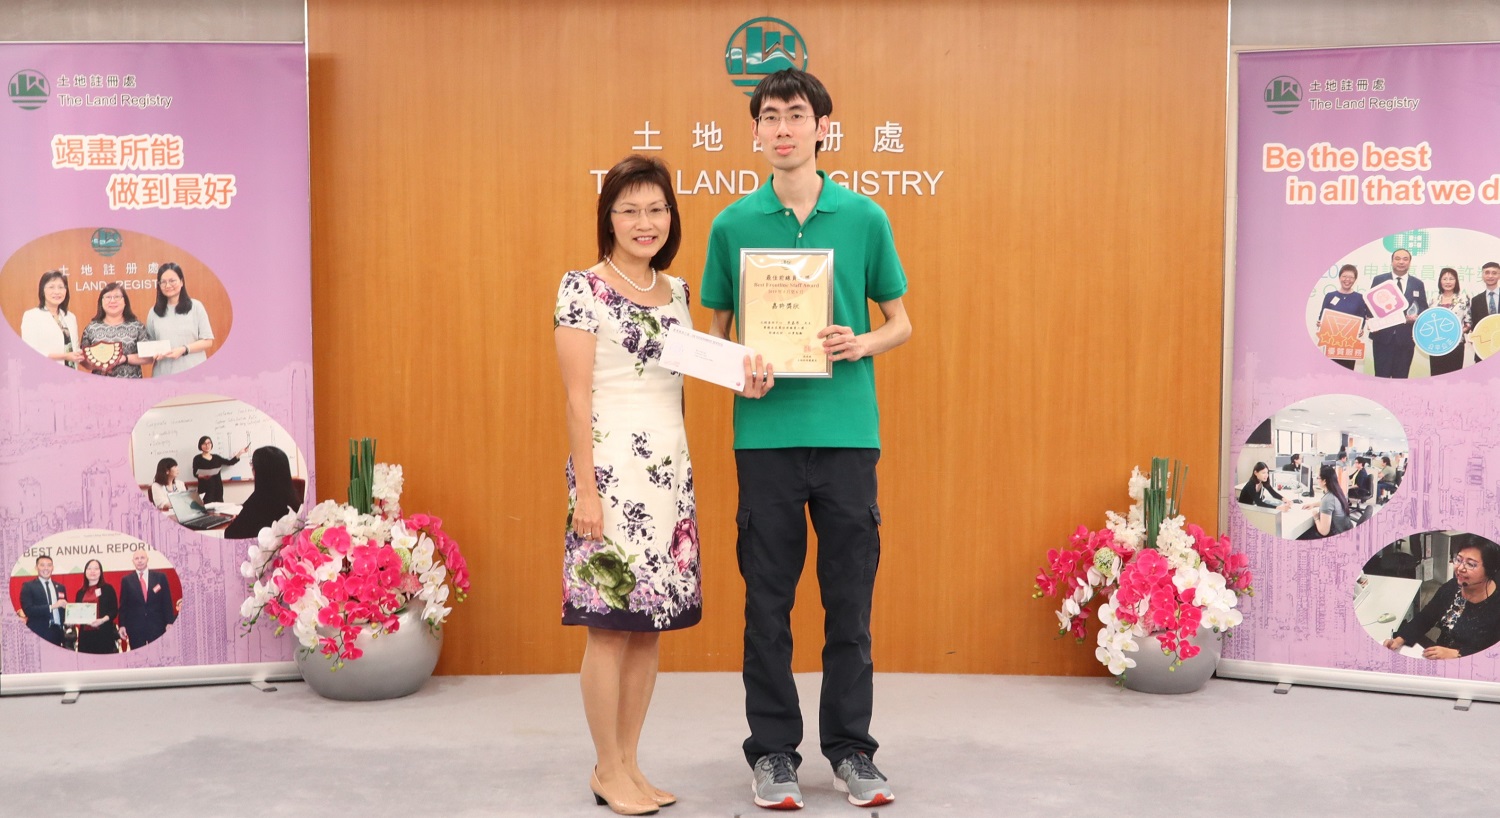 Land Registry Best Frontline Staff Award - Mr LI Ka-hei, Contract Clerk / Yuen Long Search Office, received a certificate for the Individual Award